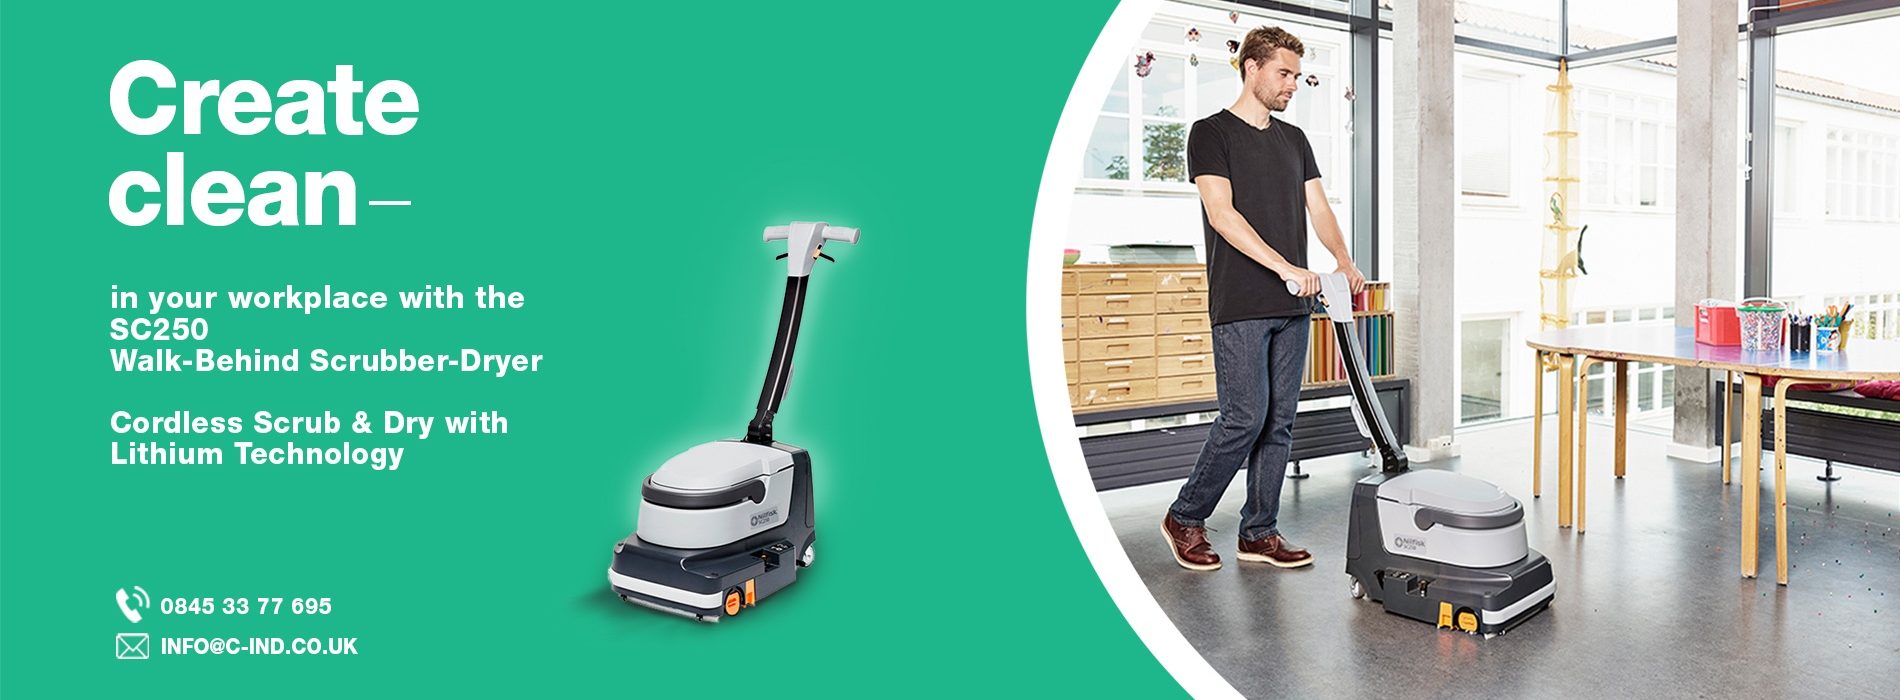 Industrial Floor Cleaning Machines Available For Hire Purchase